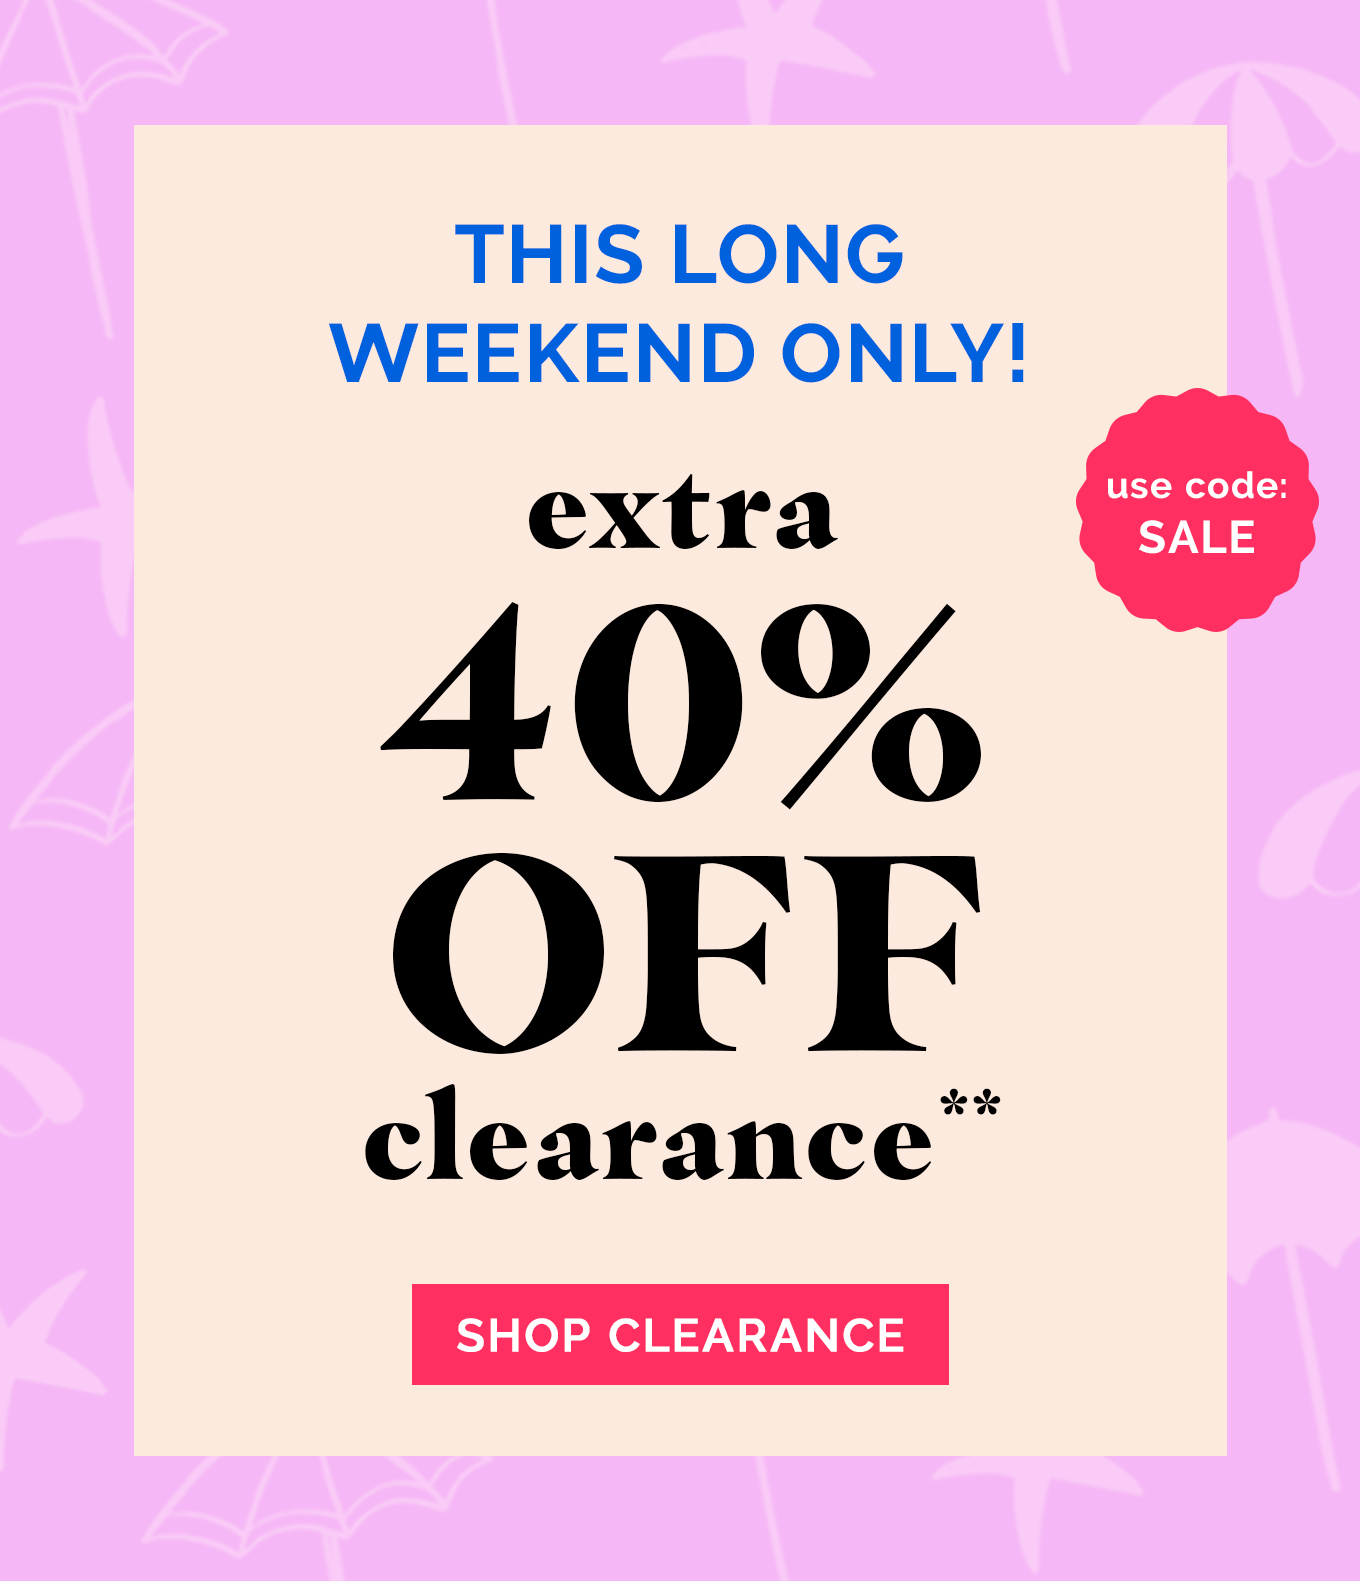 This Long Weekend Only! EXTRA 40% OFF CLEARANCE!** | use code: SALE